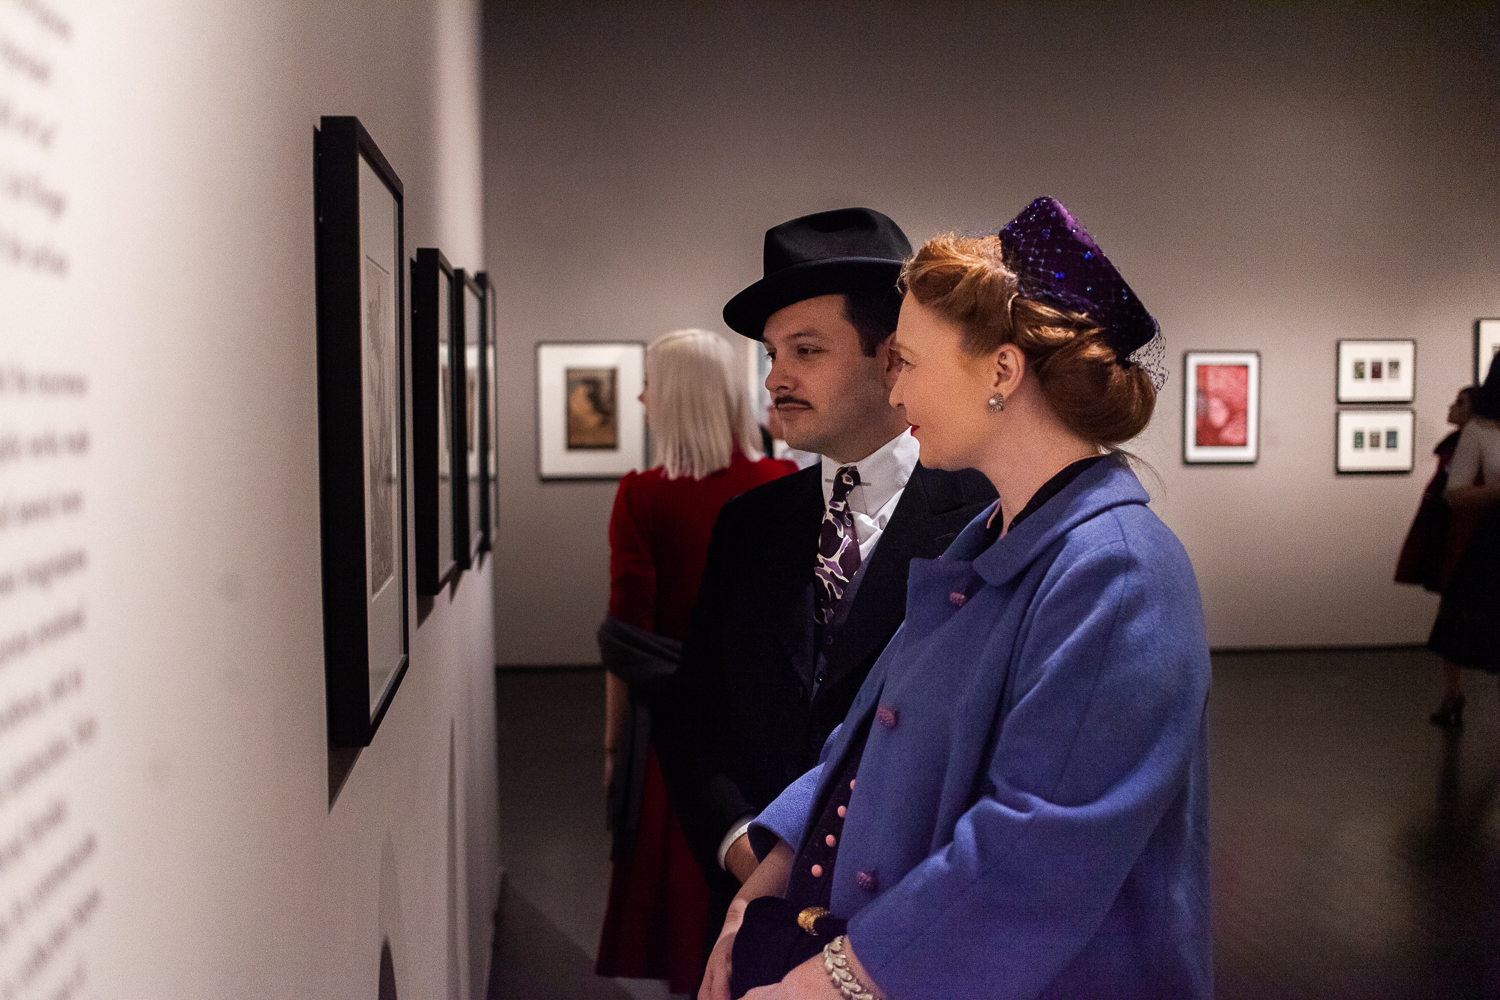 Two well-dressed people looking at art in a gallery.